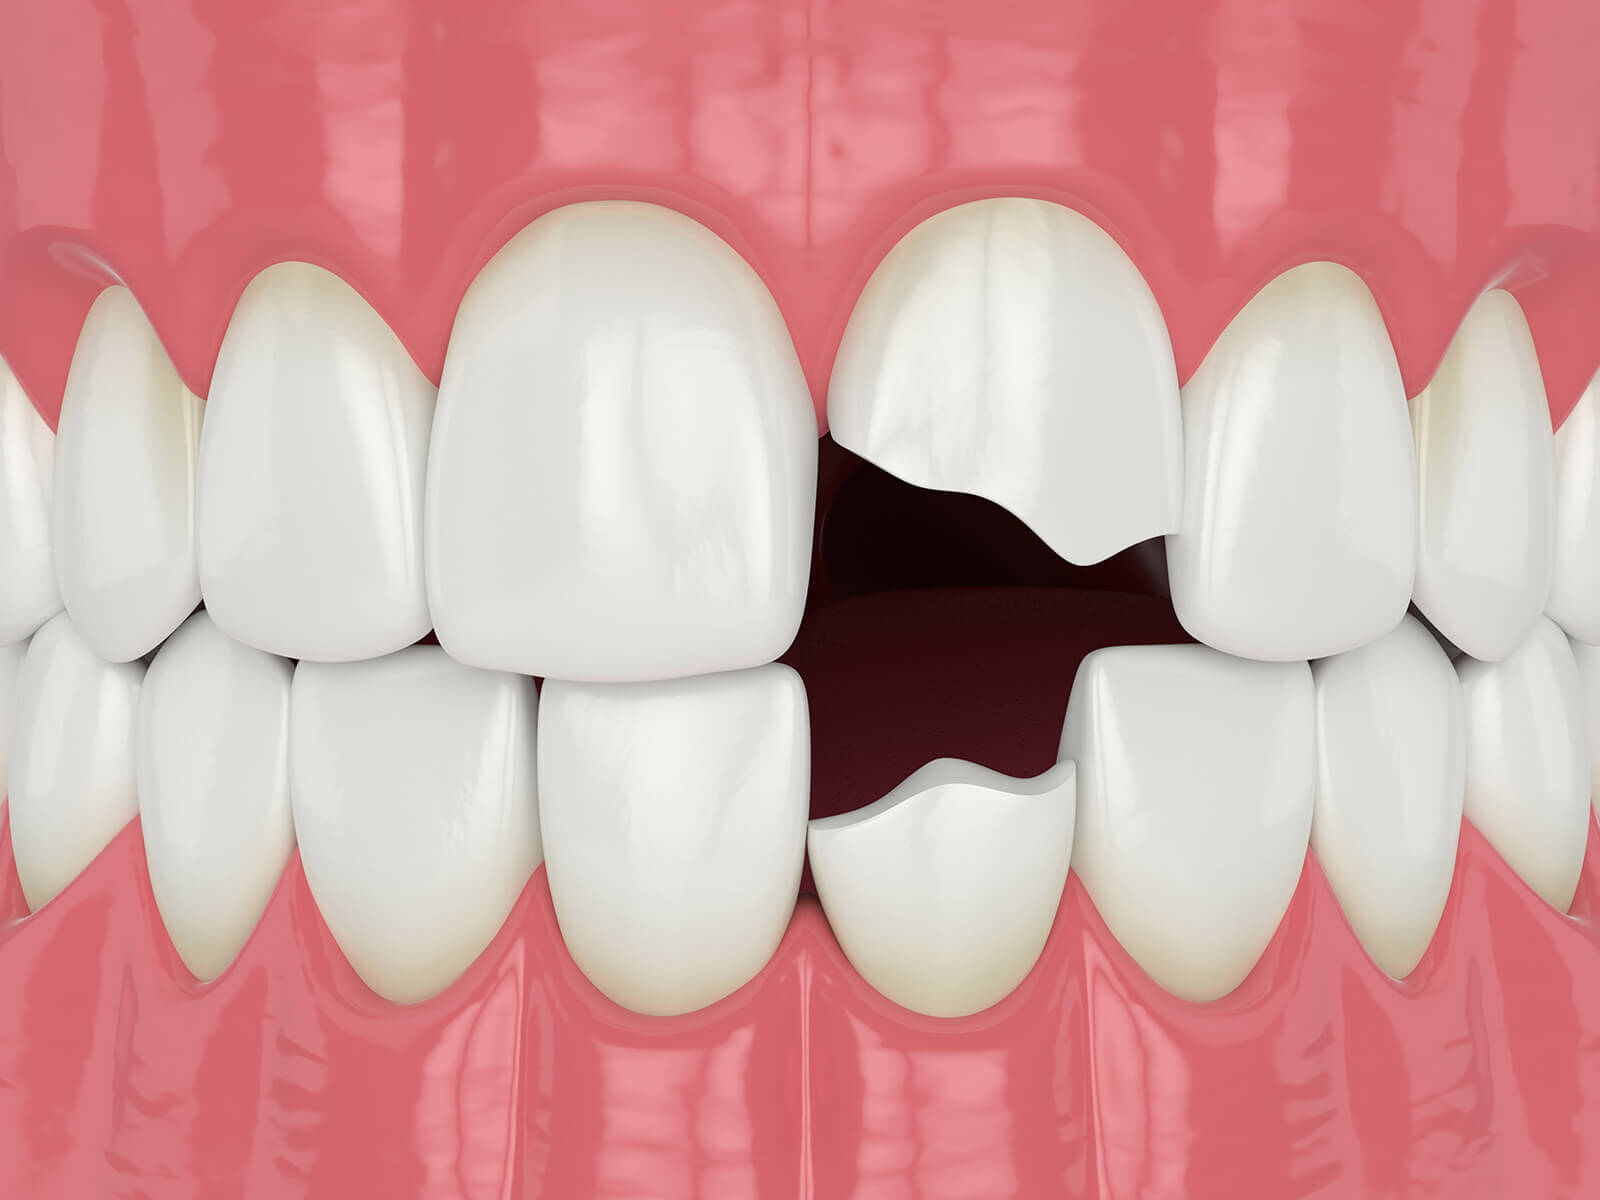 5 Ways To Help You Stop Chipping Your Teeth